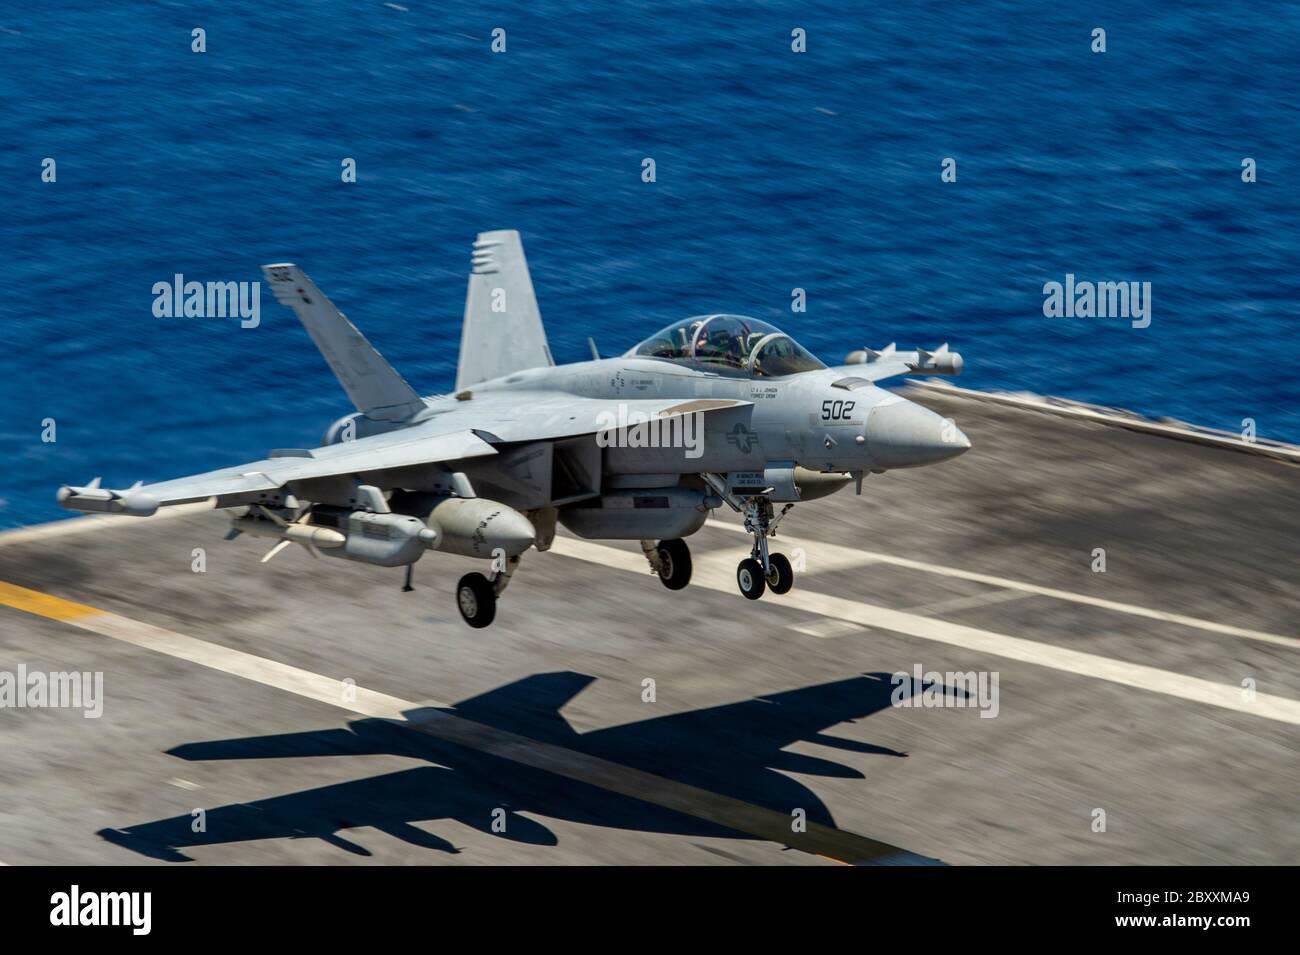 A U.S. Navy EA-18G Growler fighter aircraft assigned to the Rooks of Electronic Attack Squadron 137 lands on the flight deck of the Nimitz-class aircraft carrier USS Harry S. Truman June 2, 2020 operating in the Atlantic Ocean. Stock Photo